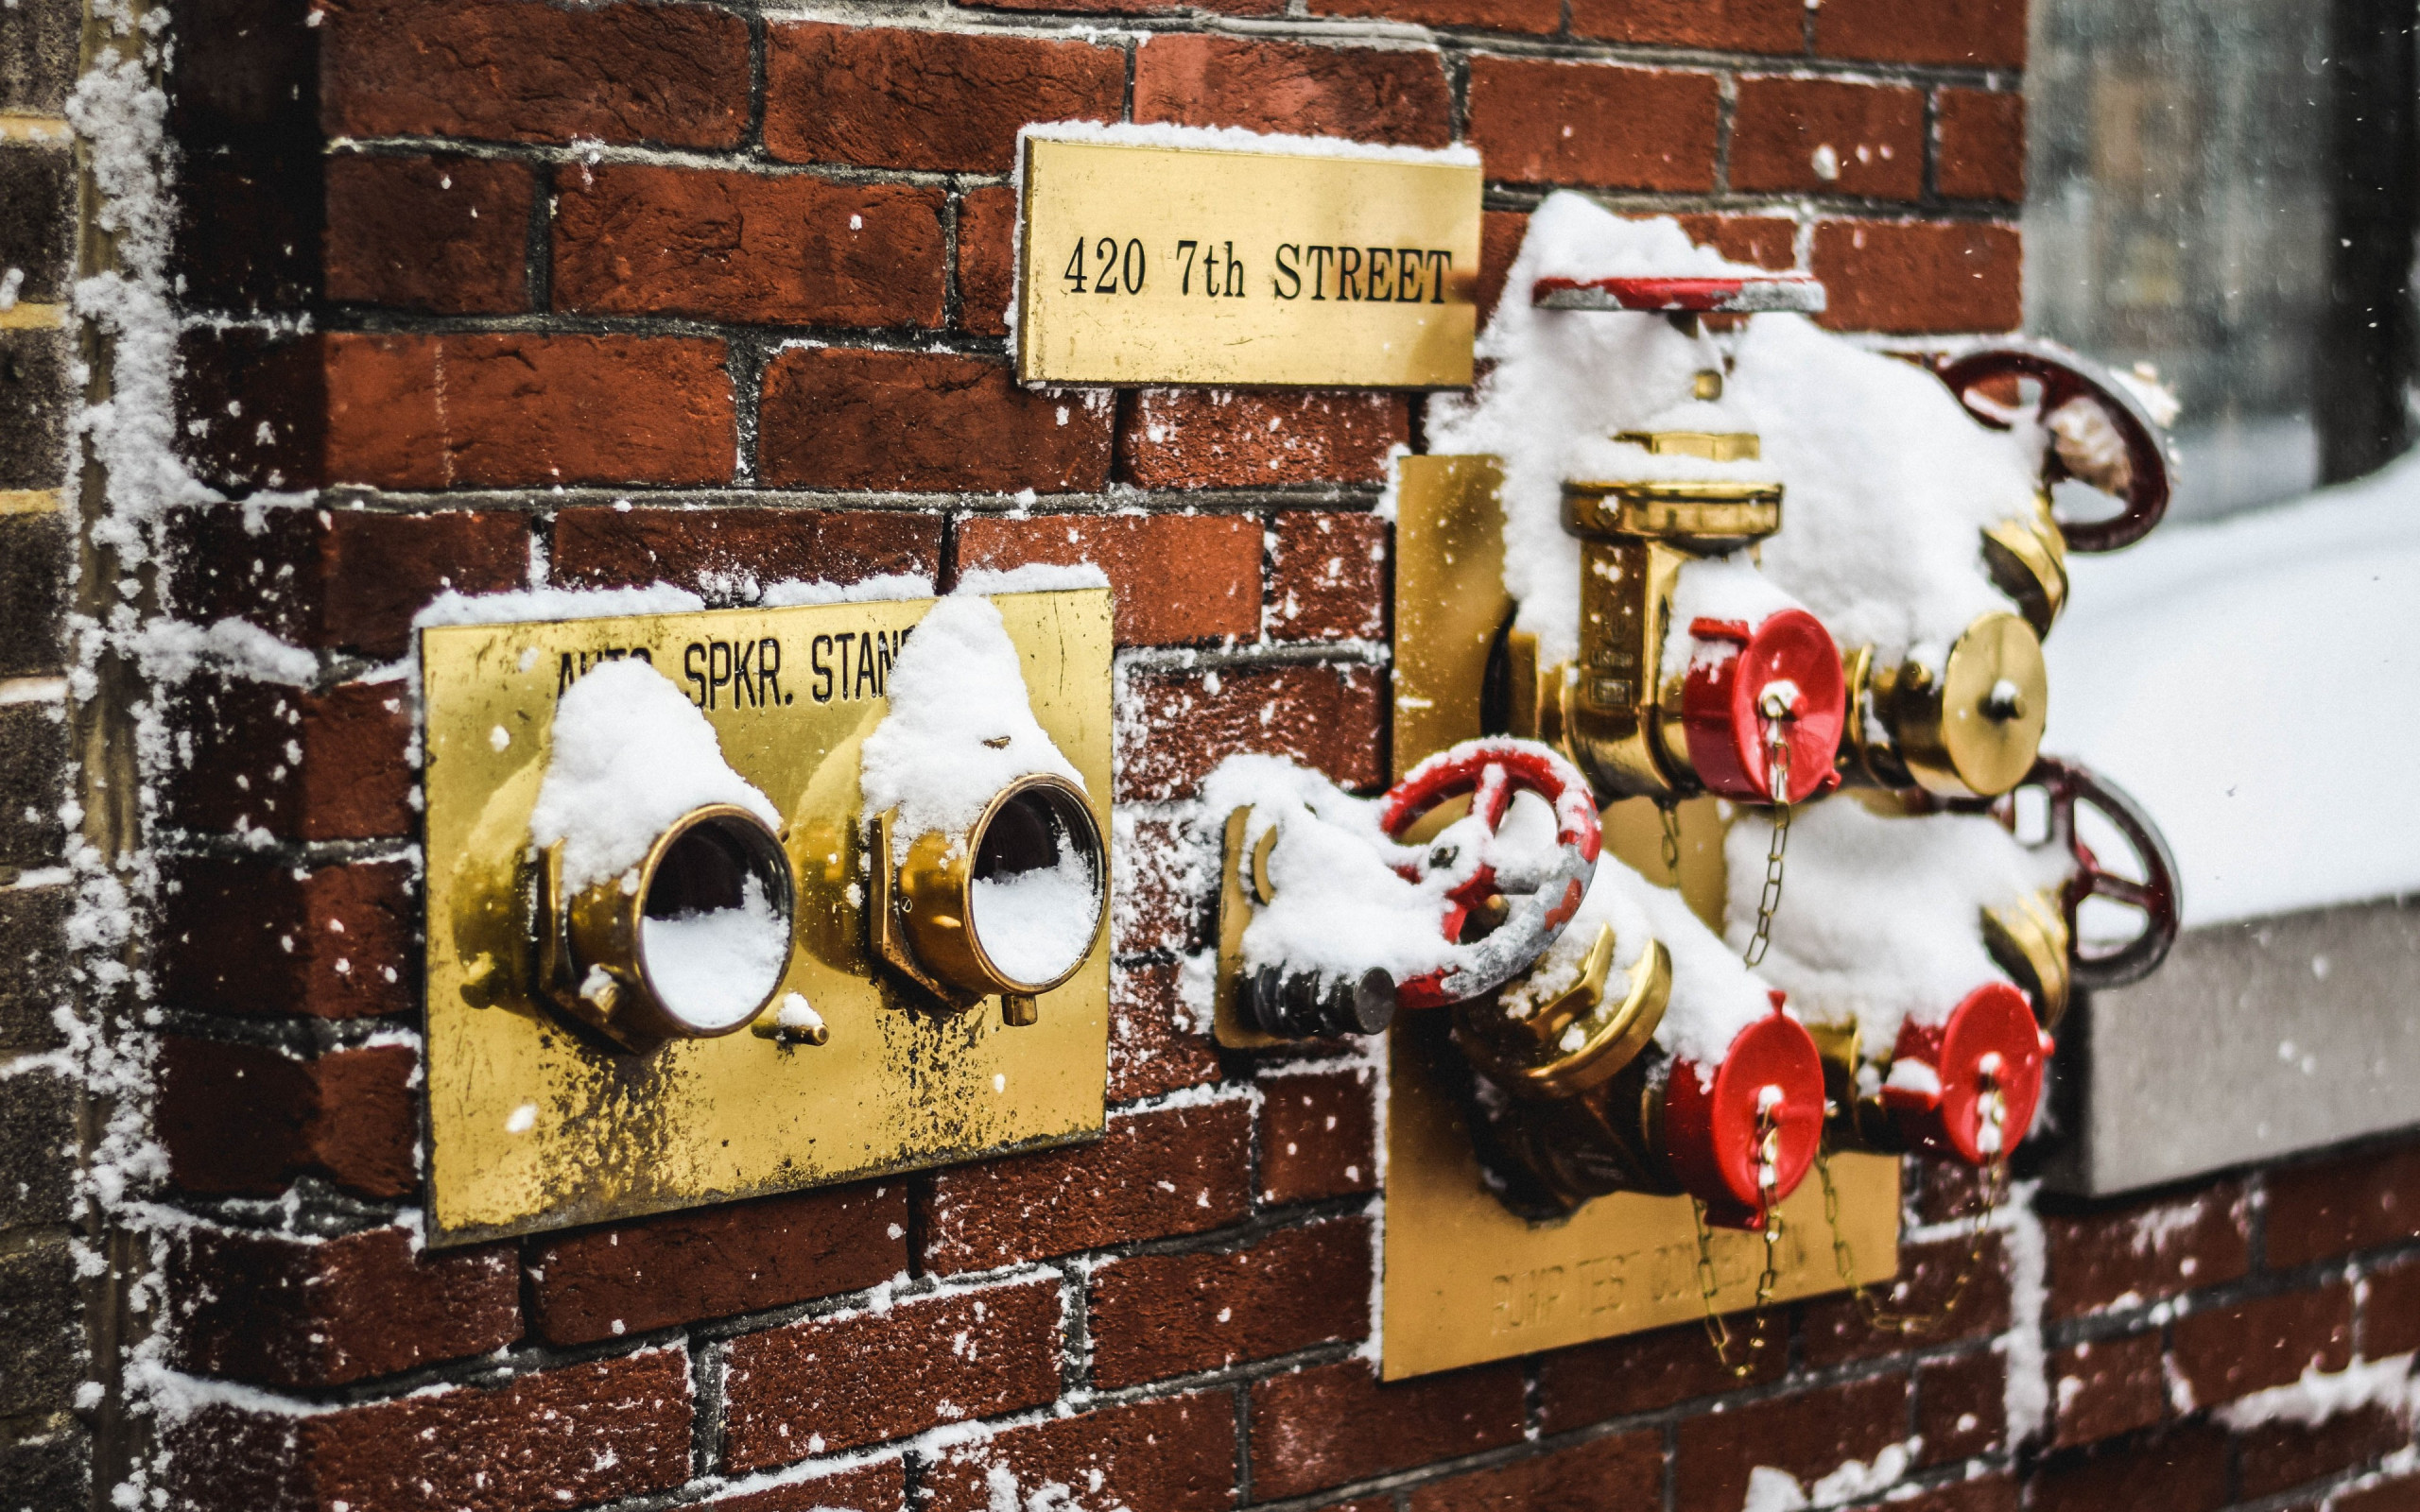 Snow covered fire standpipes in Washington wallpaper 2560x1600